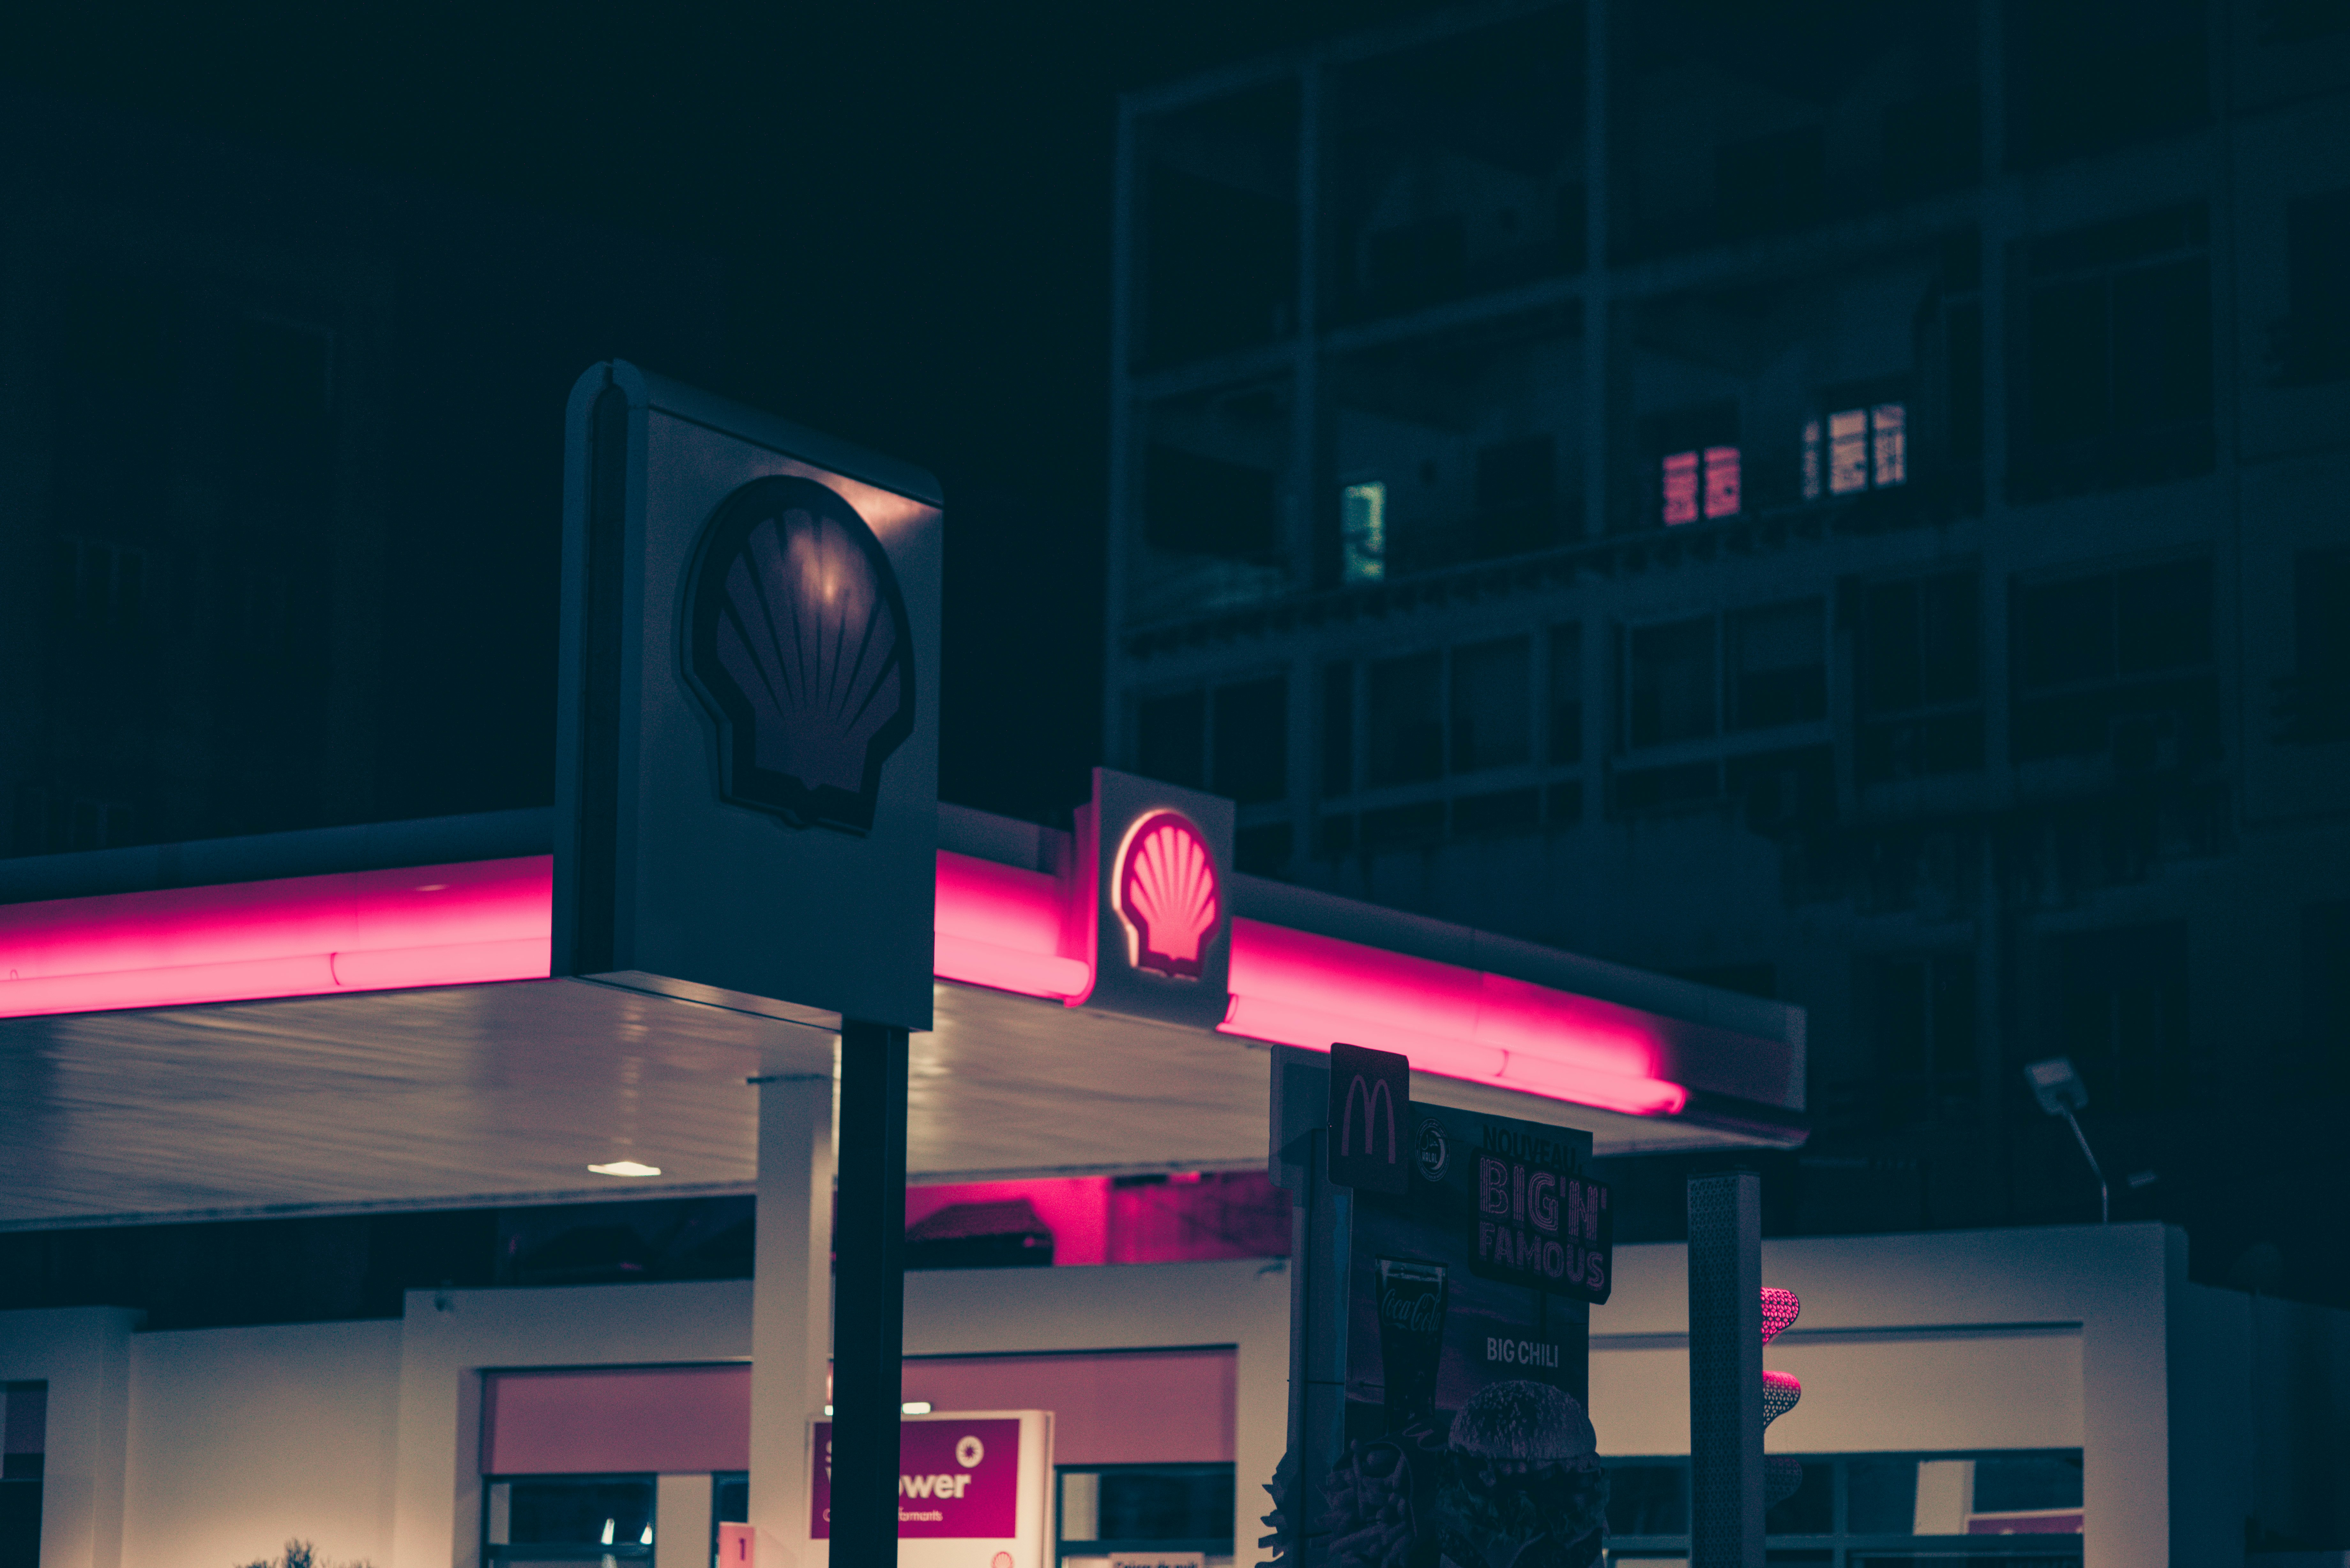 lighted Shell gas station